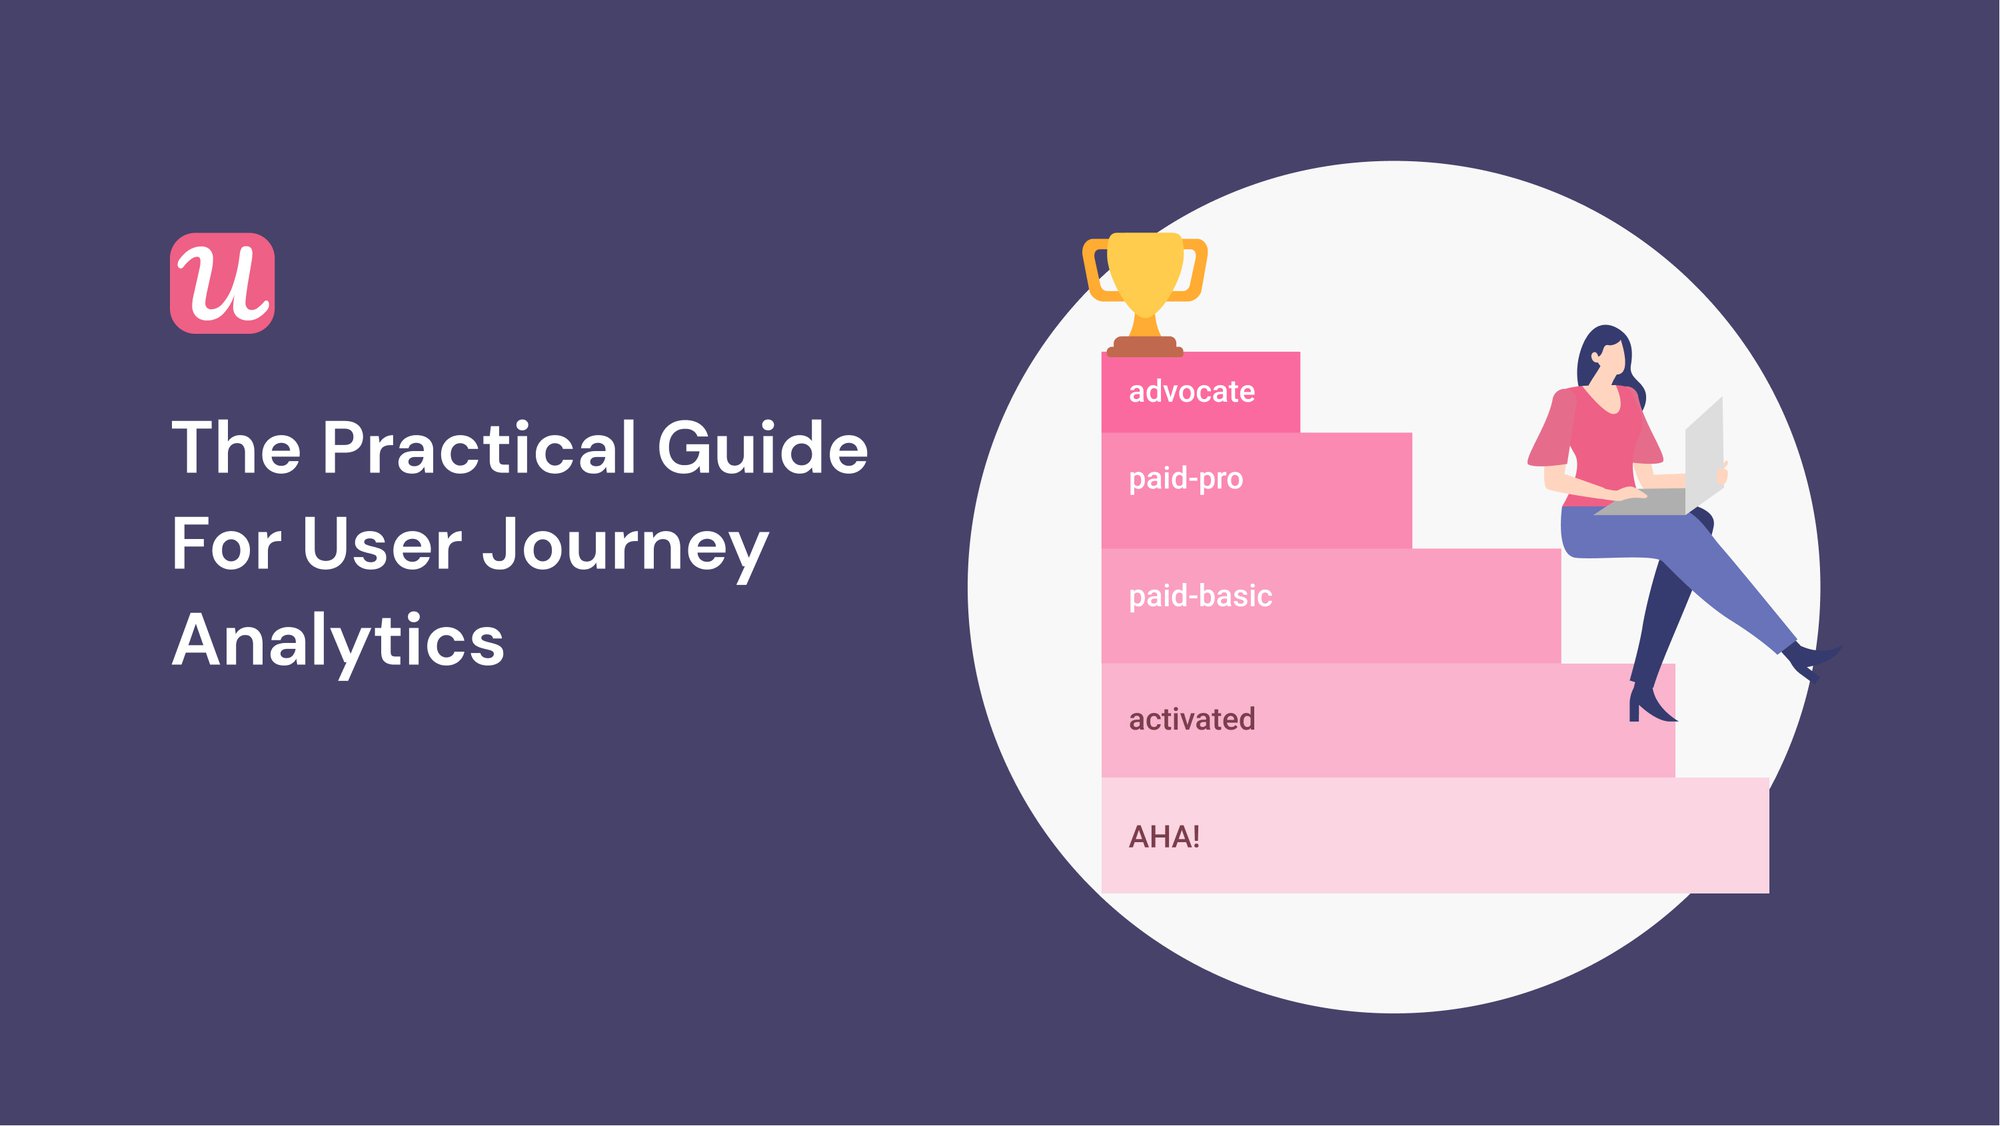 User Journey Analytics: The Practical Guide. Use Cases To Drive Growth